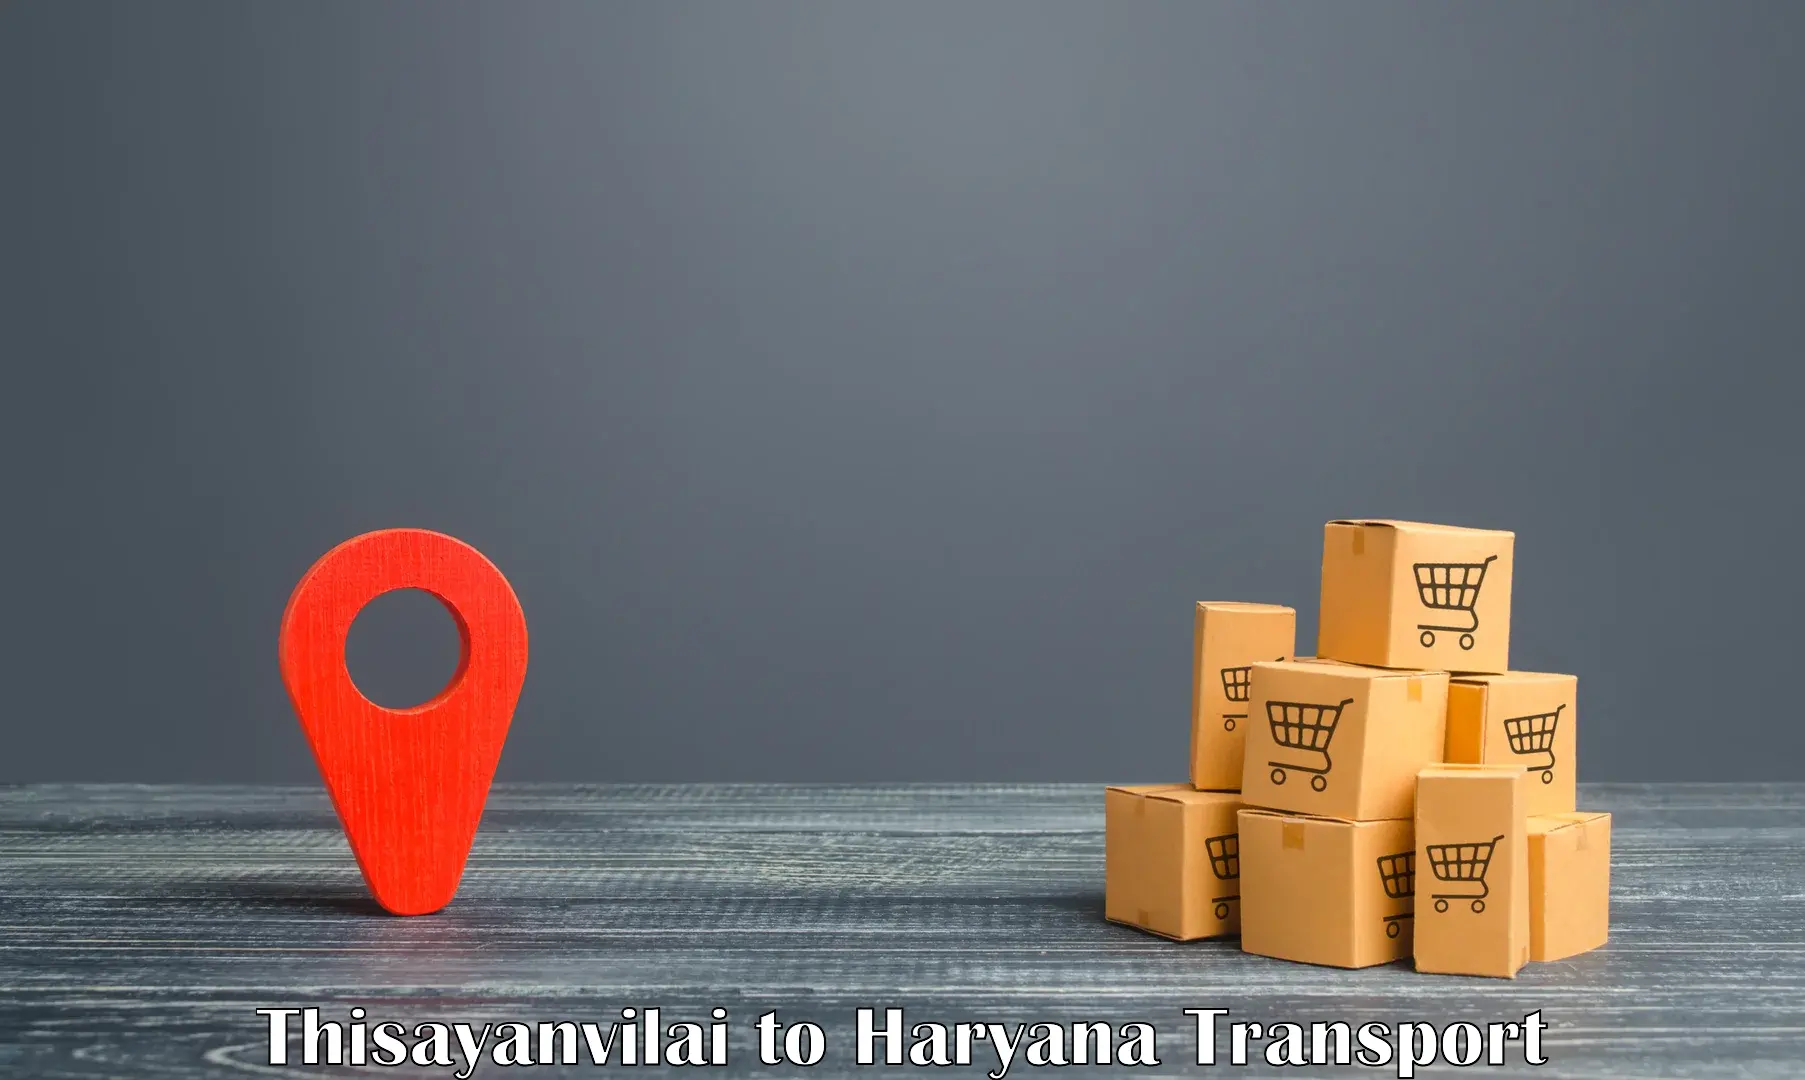 Online transport service Thisayanvilai to Pinjore